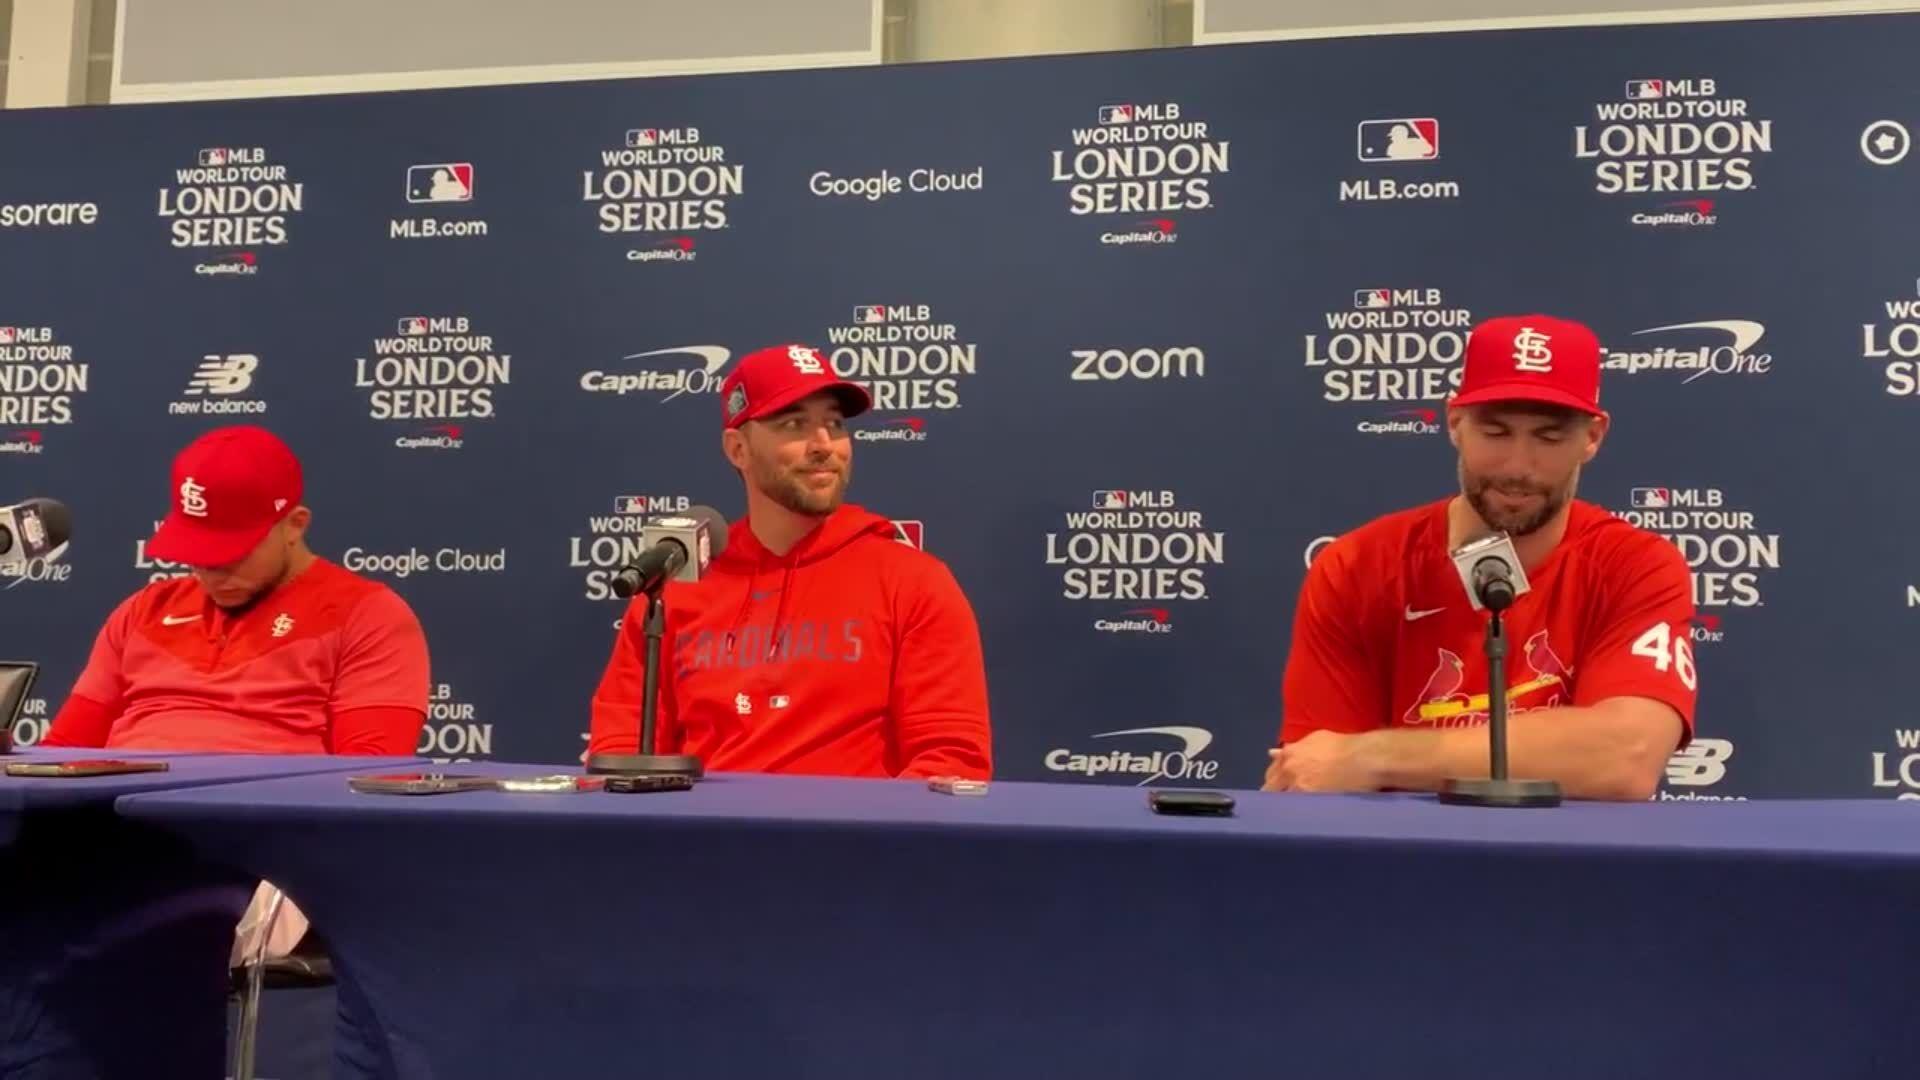 Will Cardinals-Cubs stage new dimension for London Series or just